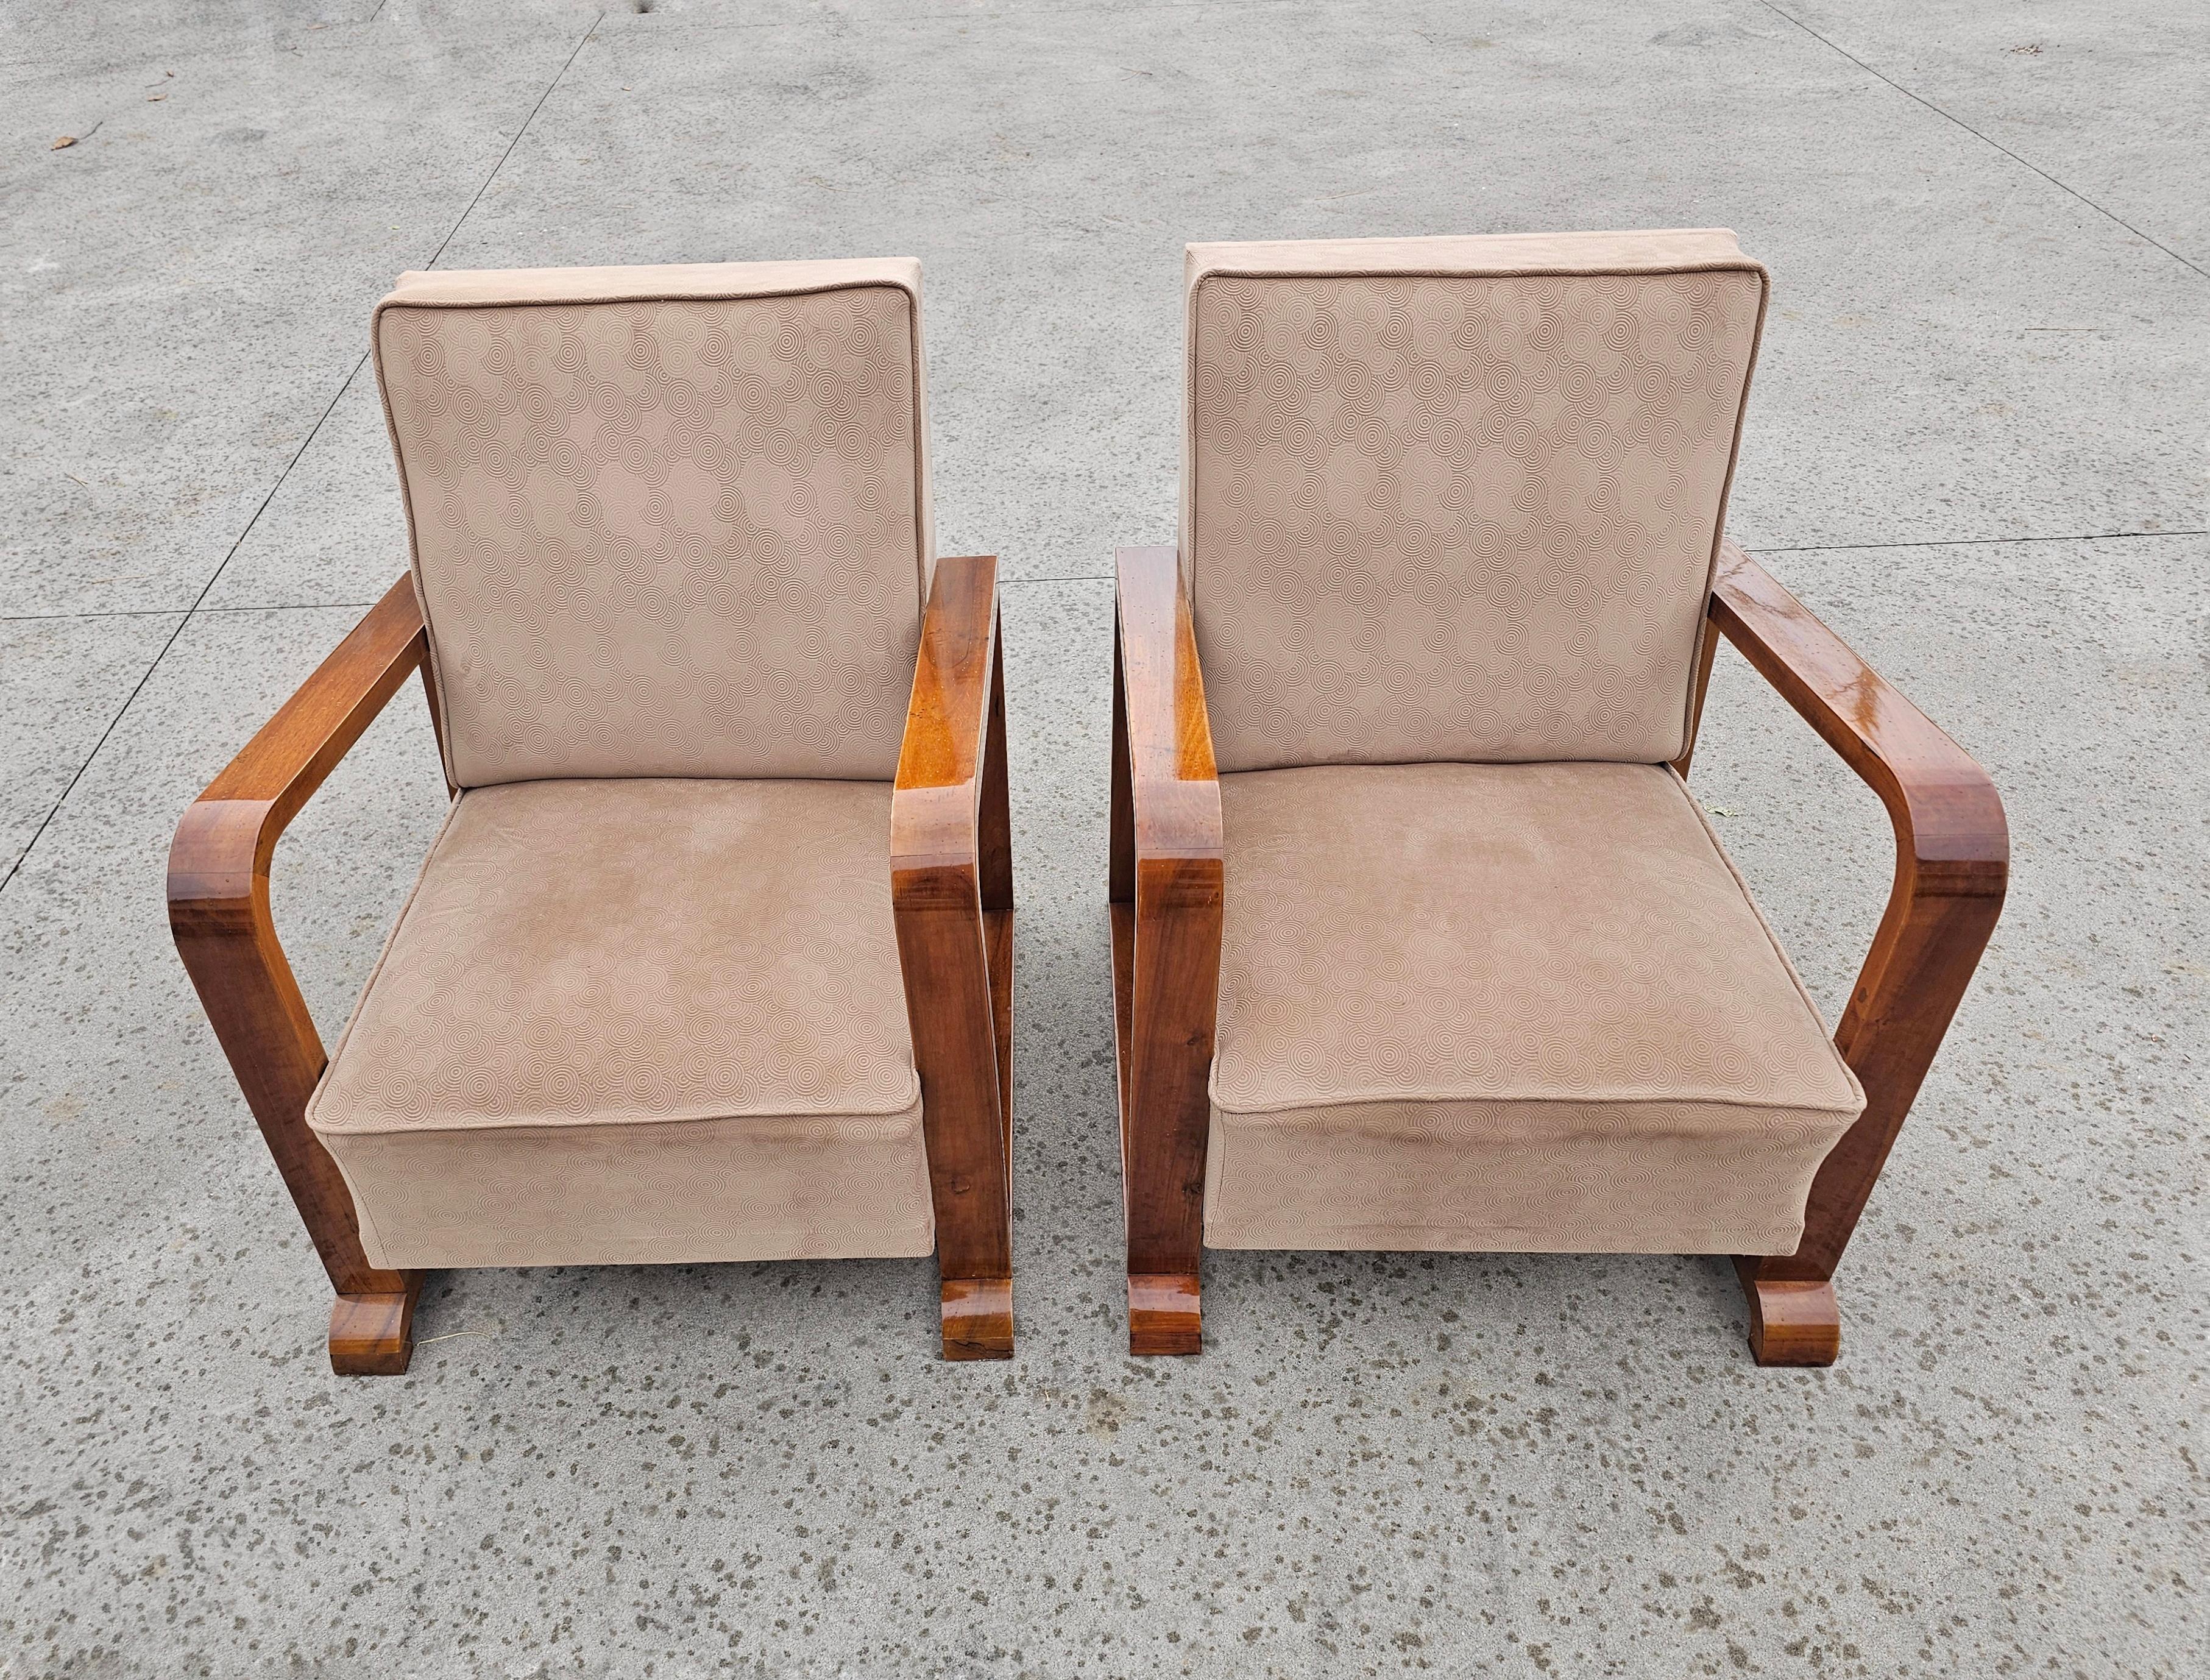 In this listing you will find striking Art Deco Armchairs done in solid walnut, with beautiful wood grain. The armrest feature extraordinary shape that is rarely seen among Art Deco armchairs. They have been refurbished a year ago (according to the